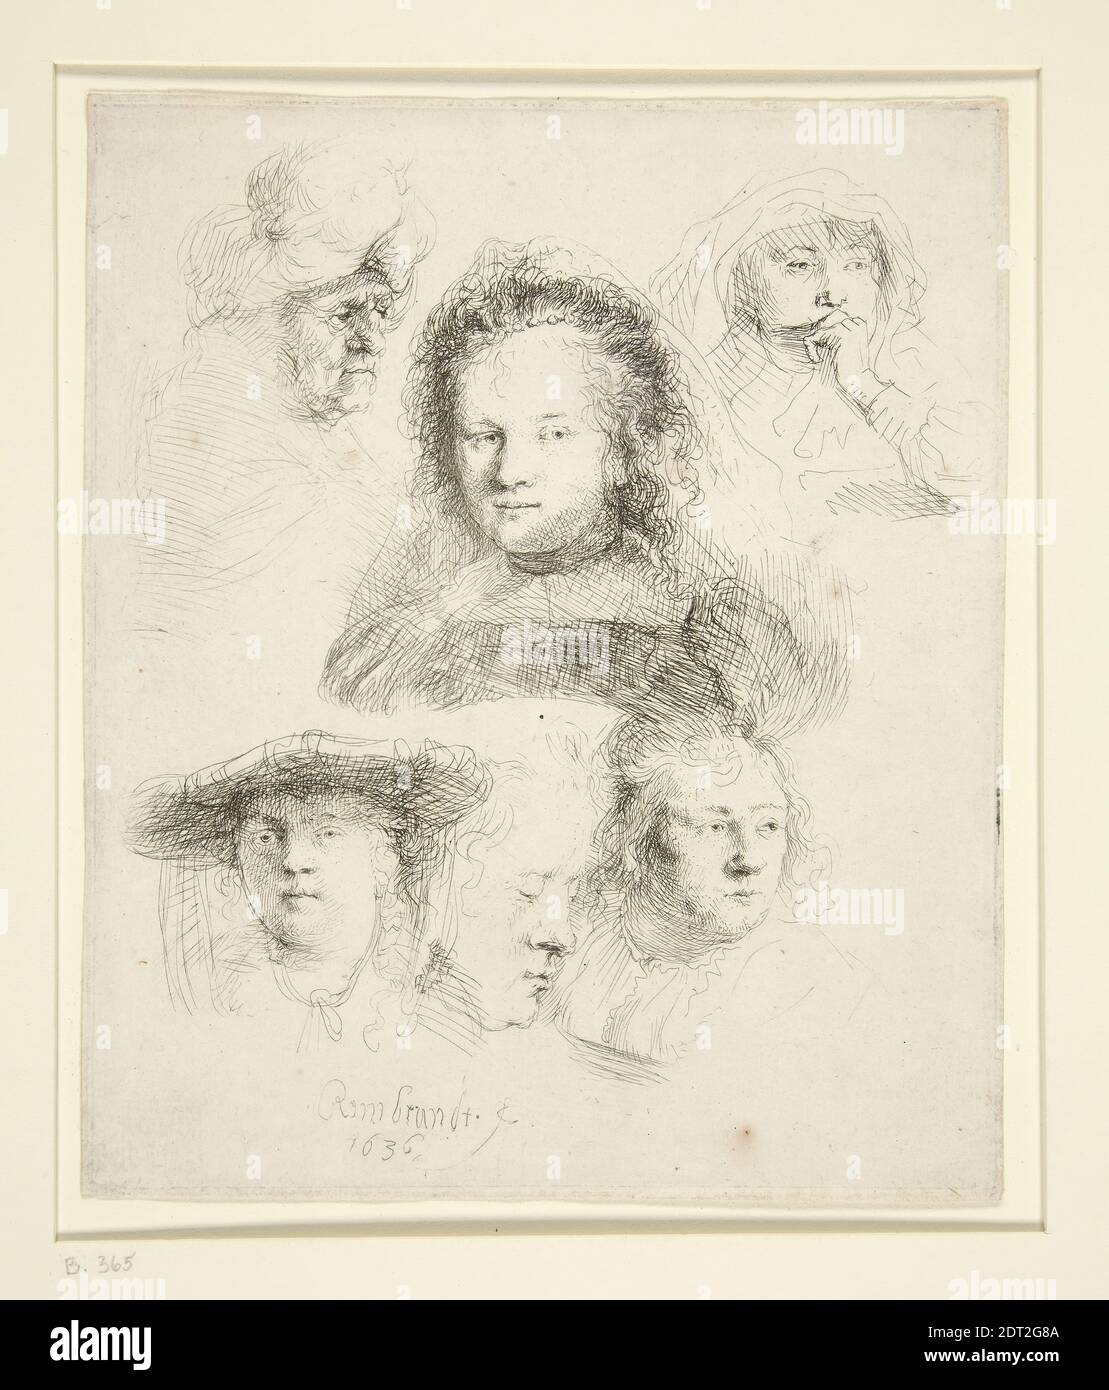 Artist: Rembrandt (Rembrandt van Rijn), Dutch, 1606–1669, Studies of the Head of Saskia and Others, Etching, 15.1 × 12.6 cm (5 15/16 × 4 15/16 in.), Made in The Netherlands, Dutch, 17th century, Works on Paper - Prints Stock Photo